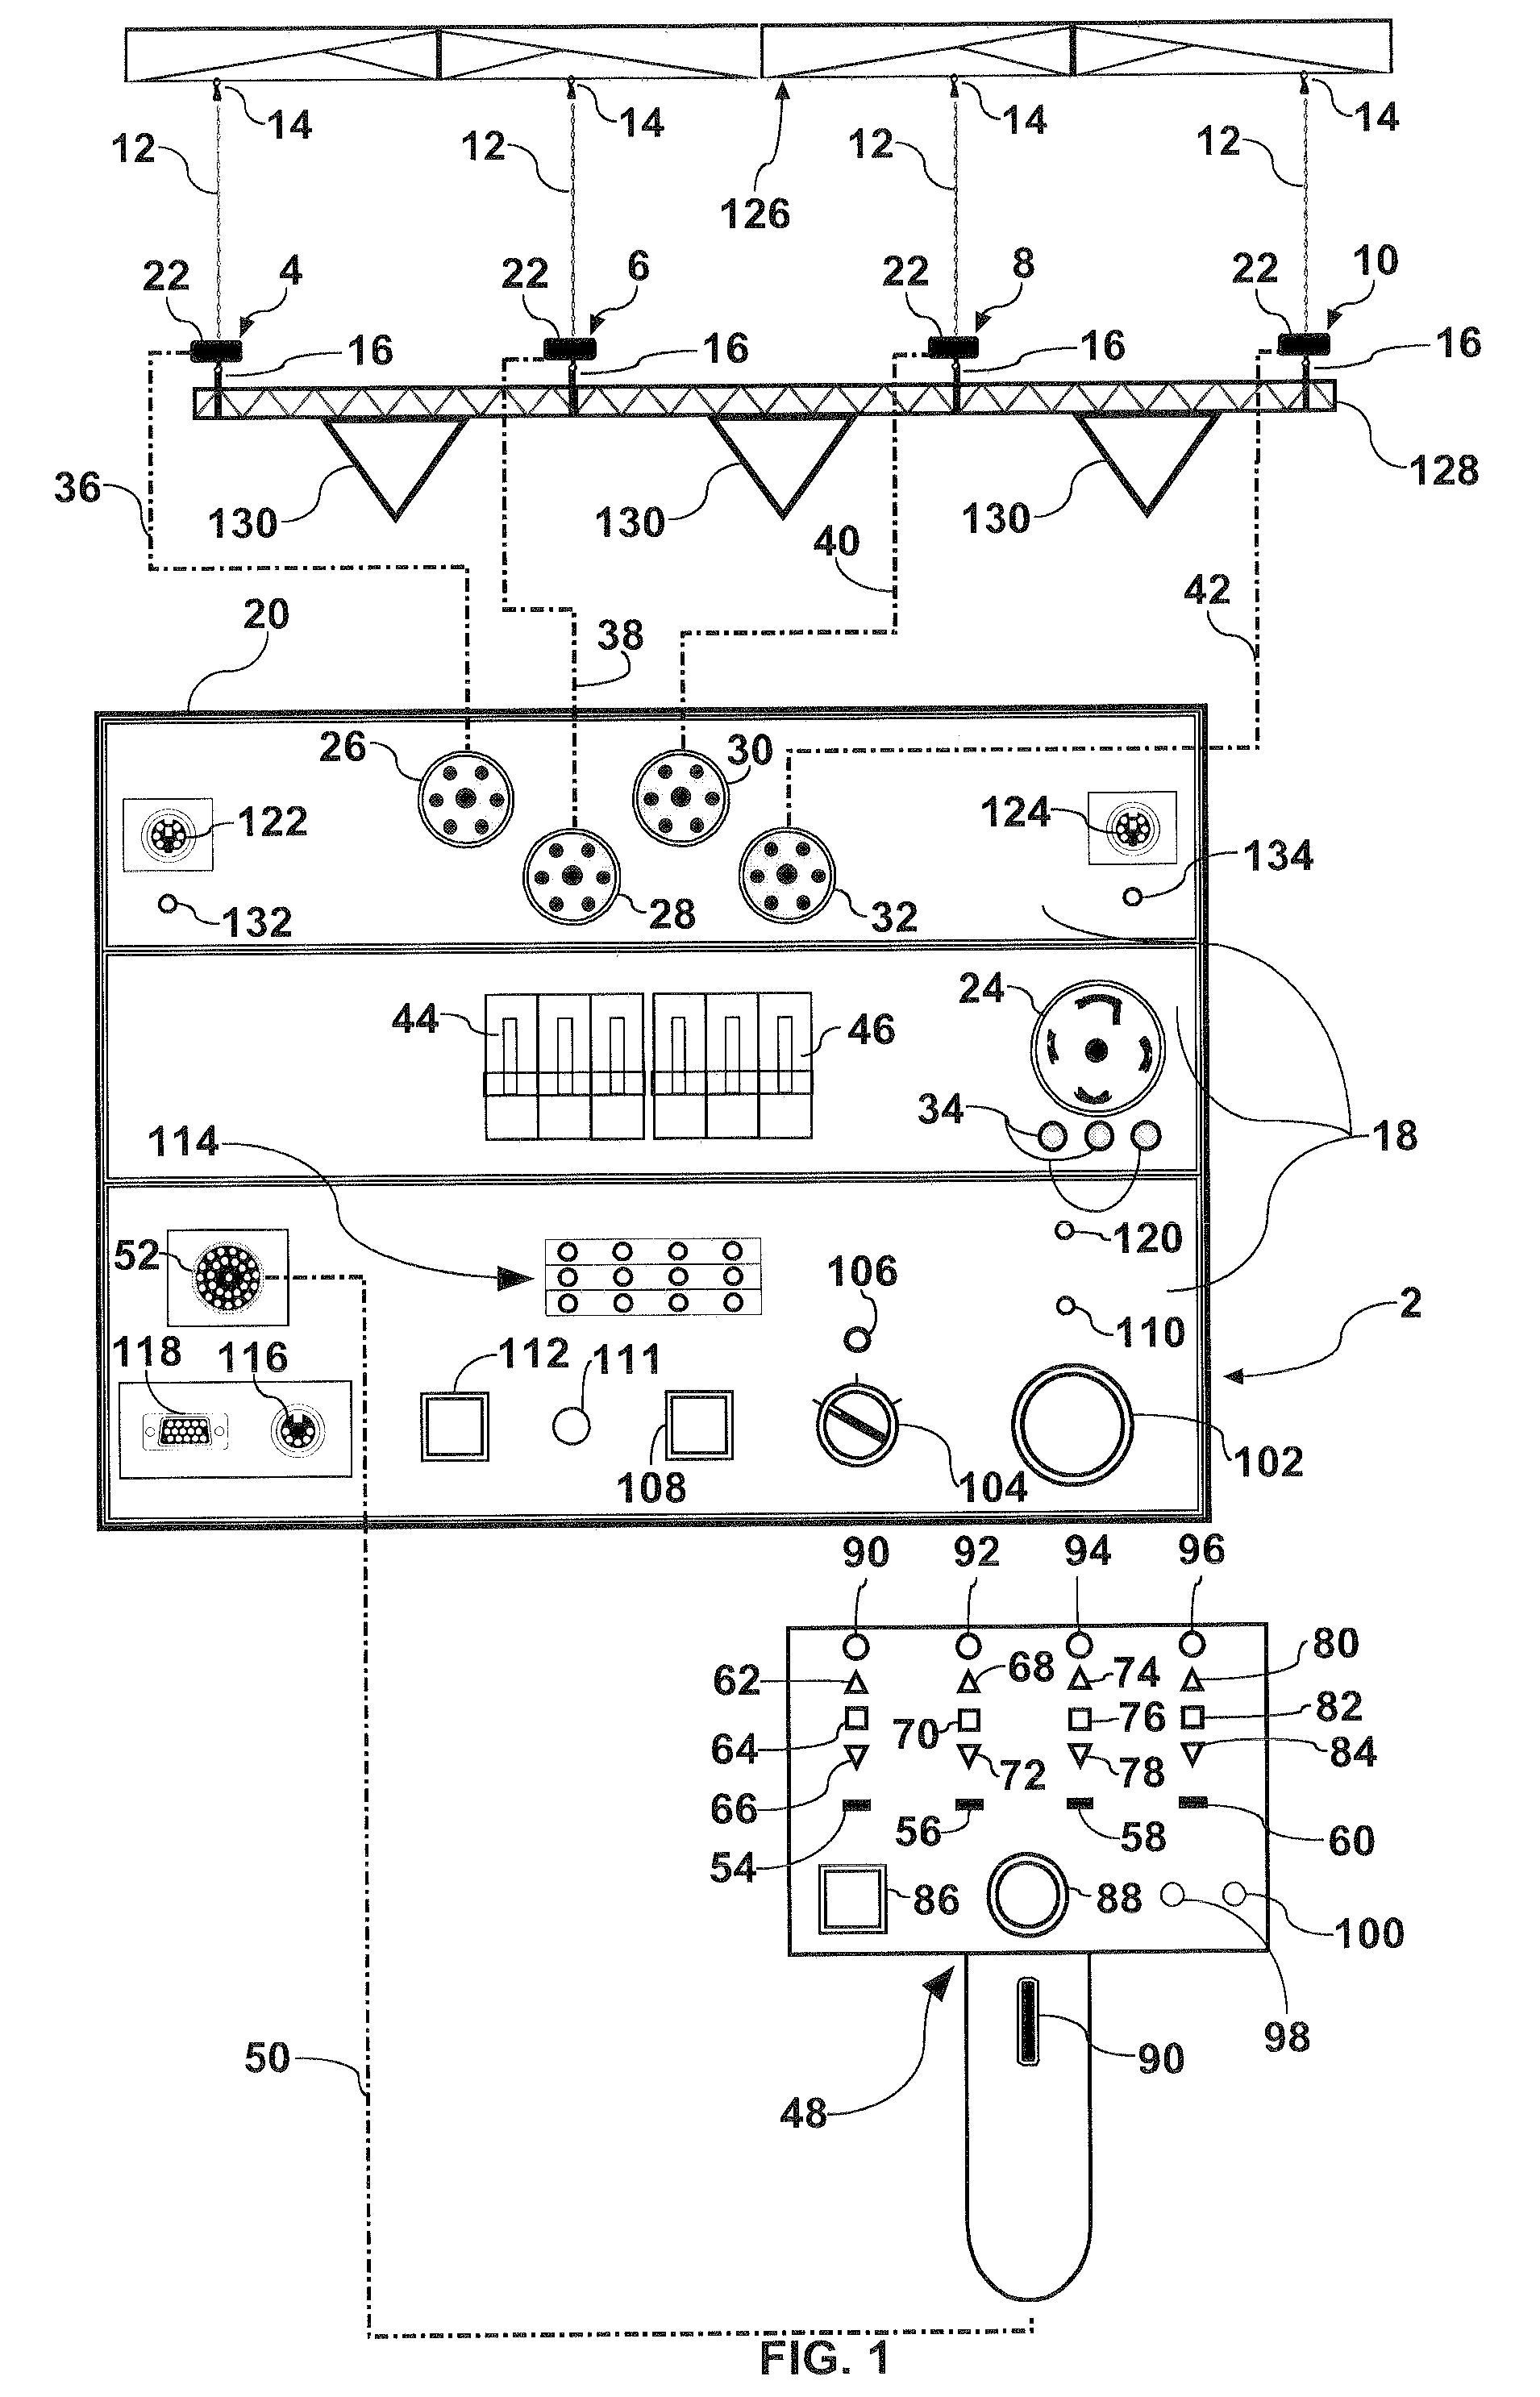 Fault monitoring system for electric single or poly-phase chain hoist motors